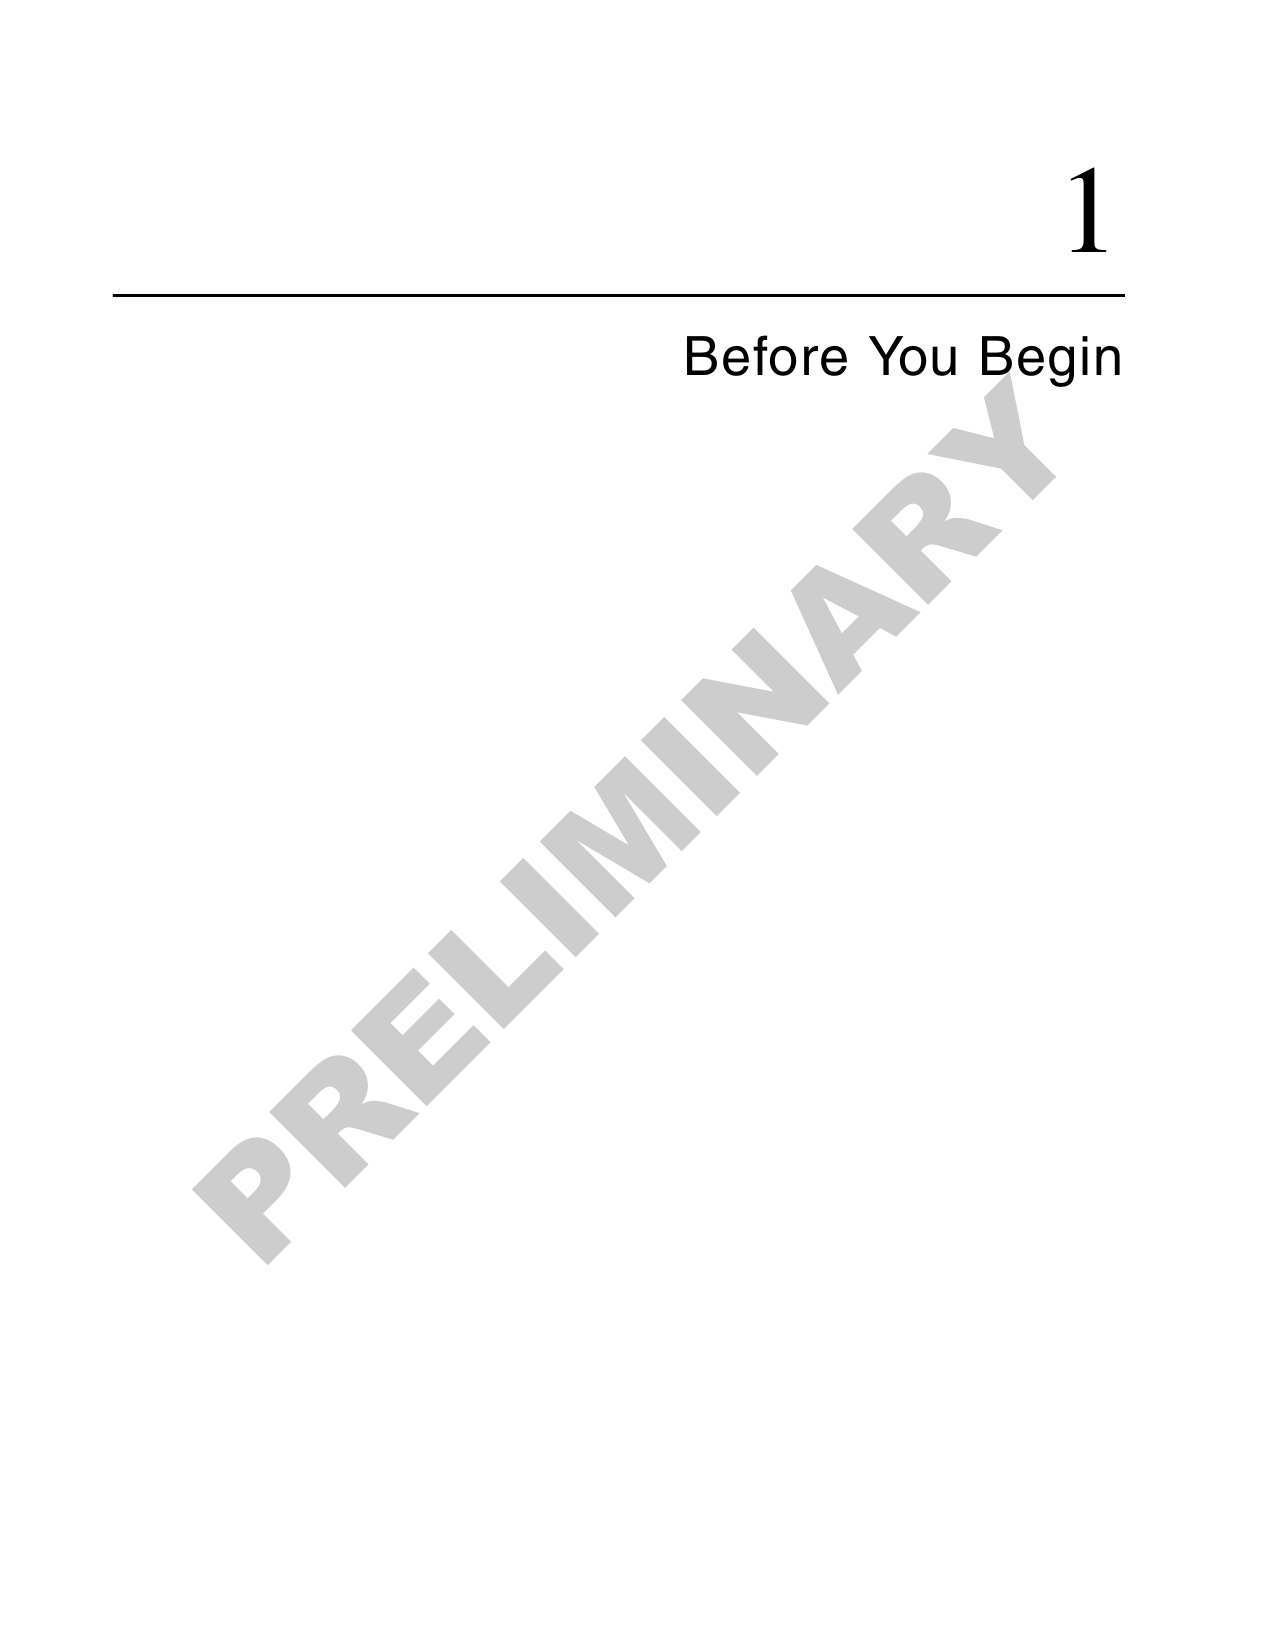 1Before You BeginPRELIMINARY